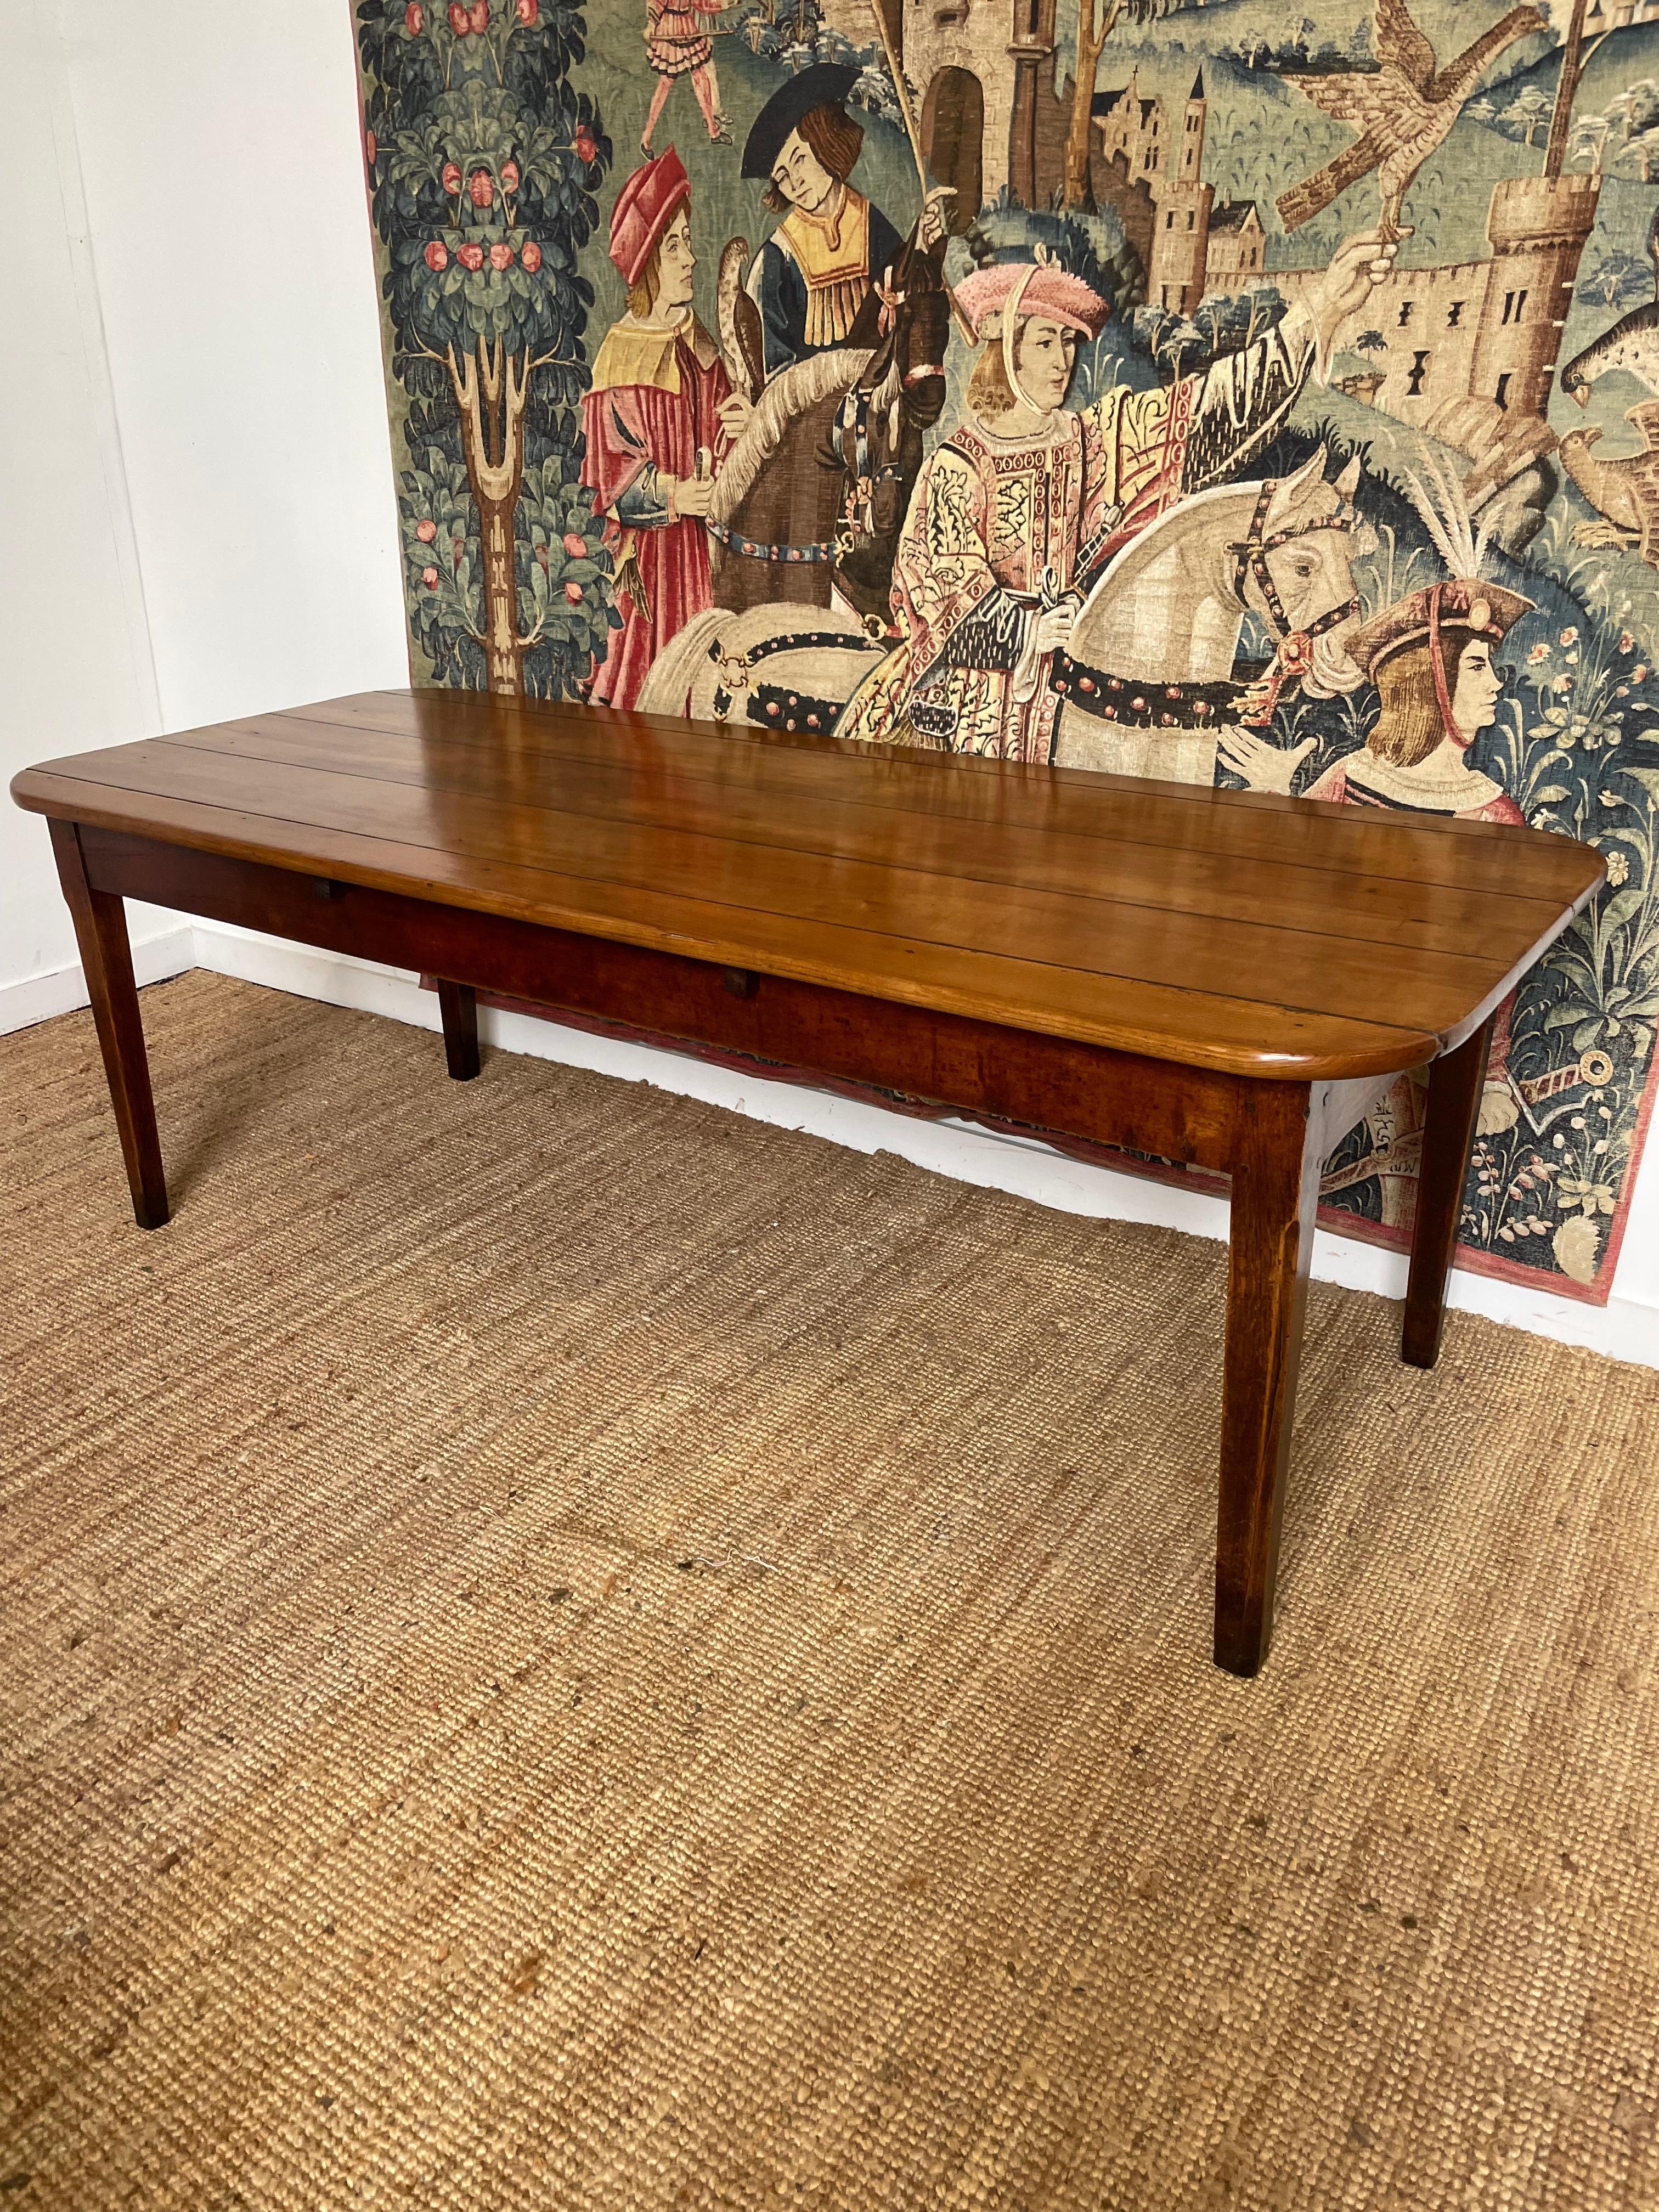 Great example of a mid 19th century cherrywood farmhouse table
Constructed from solid cherrywood , this piece has been through our workshops and been cleaned / polished
All the joints are firm . The legs have been tipped to give it the correct